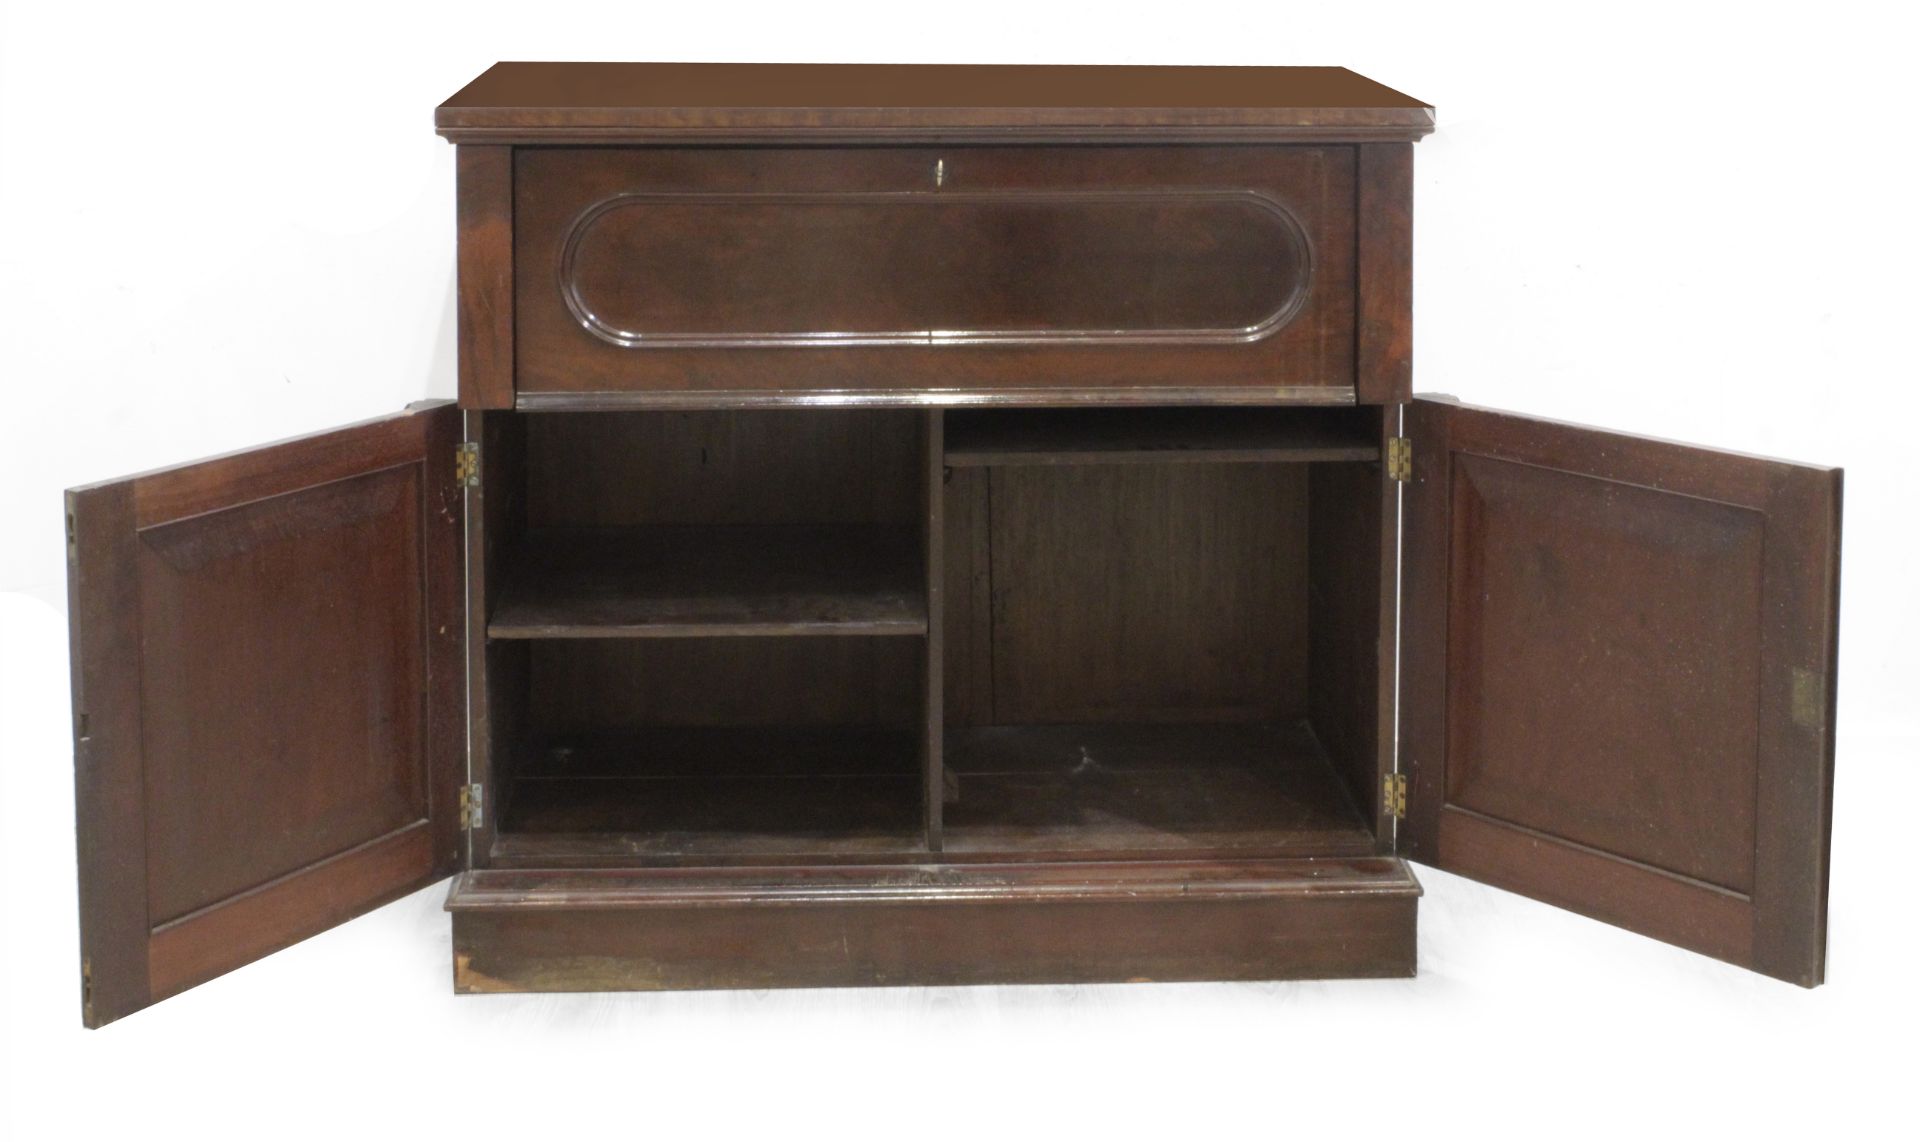 A 19th century Victorian period mahogany writing desk - Image 3 of 5